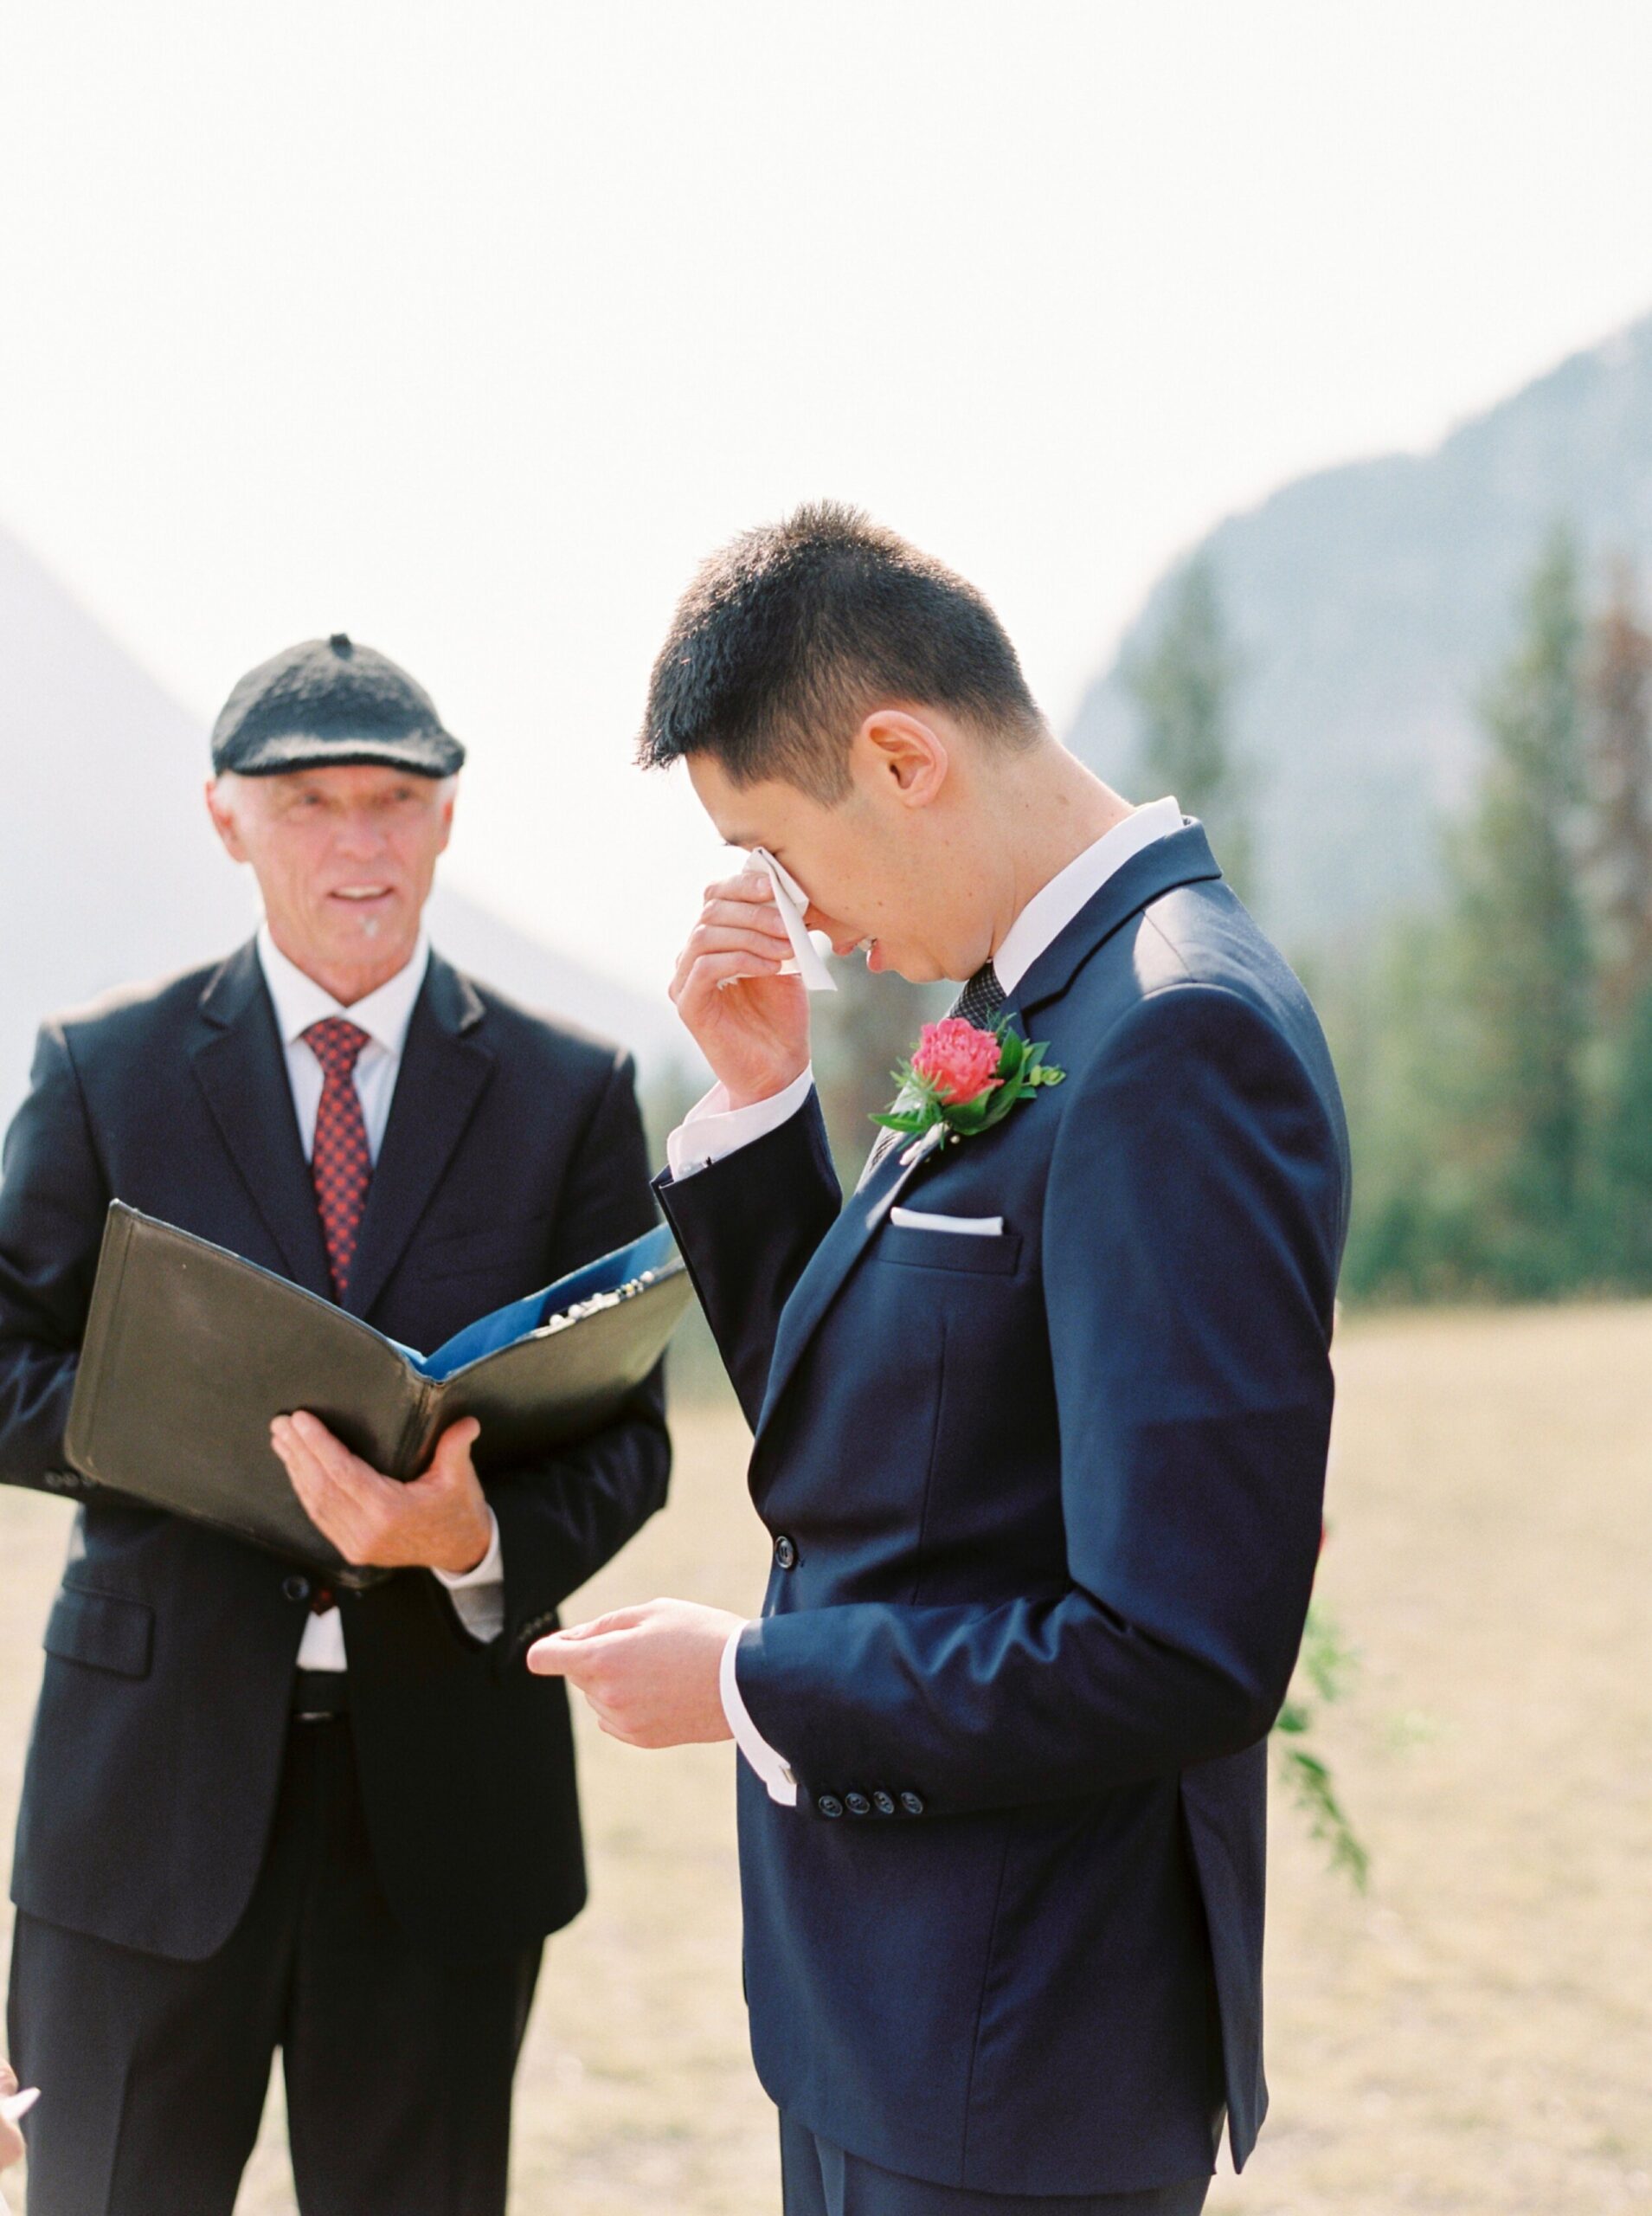  Banff wedding photographer | intimate wedding elopement | outdoor ceremony tunnel mountain | bride and groom crying | Justine Milton Photography 